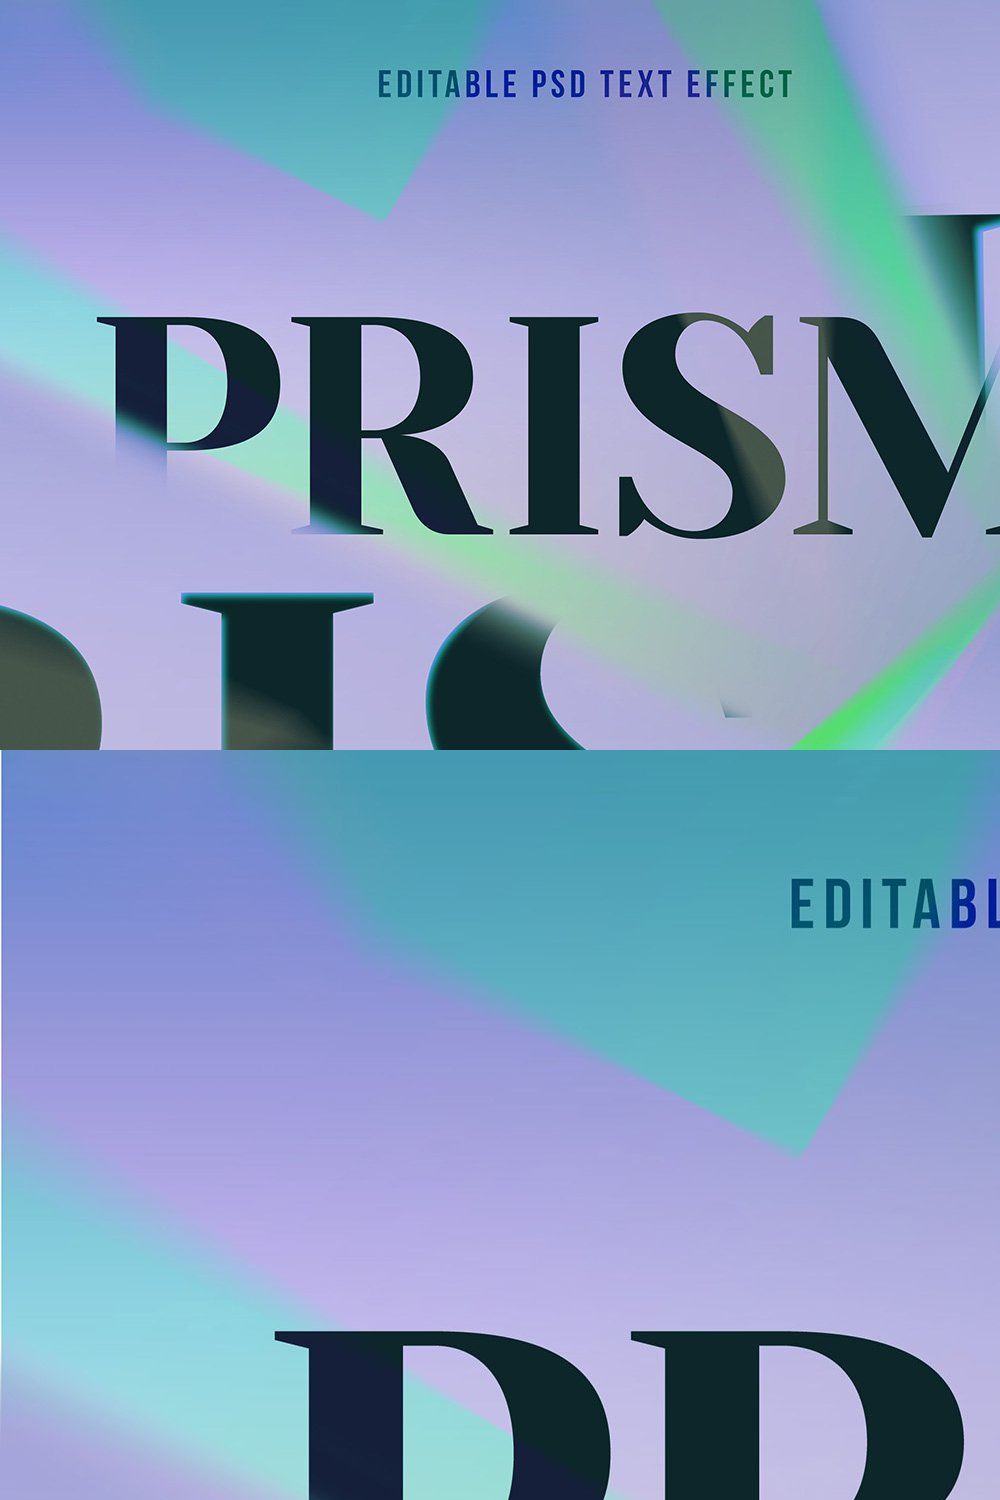 Prism Text Effect pinterest preview image.